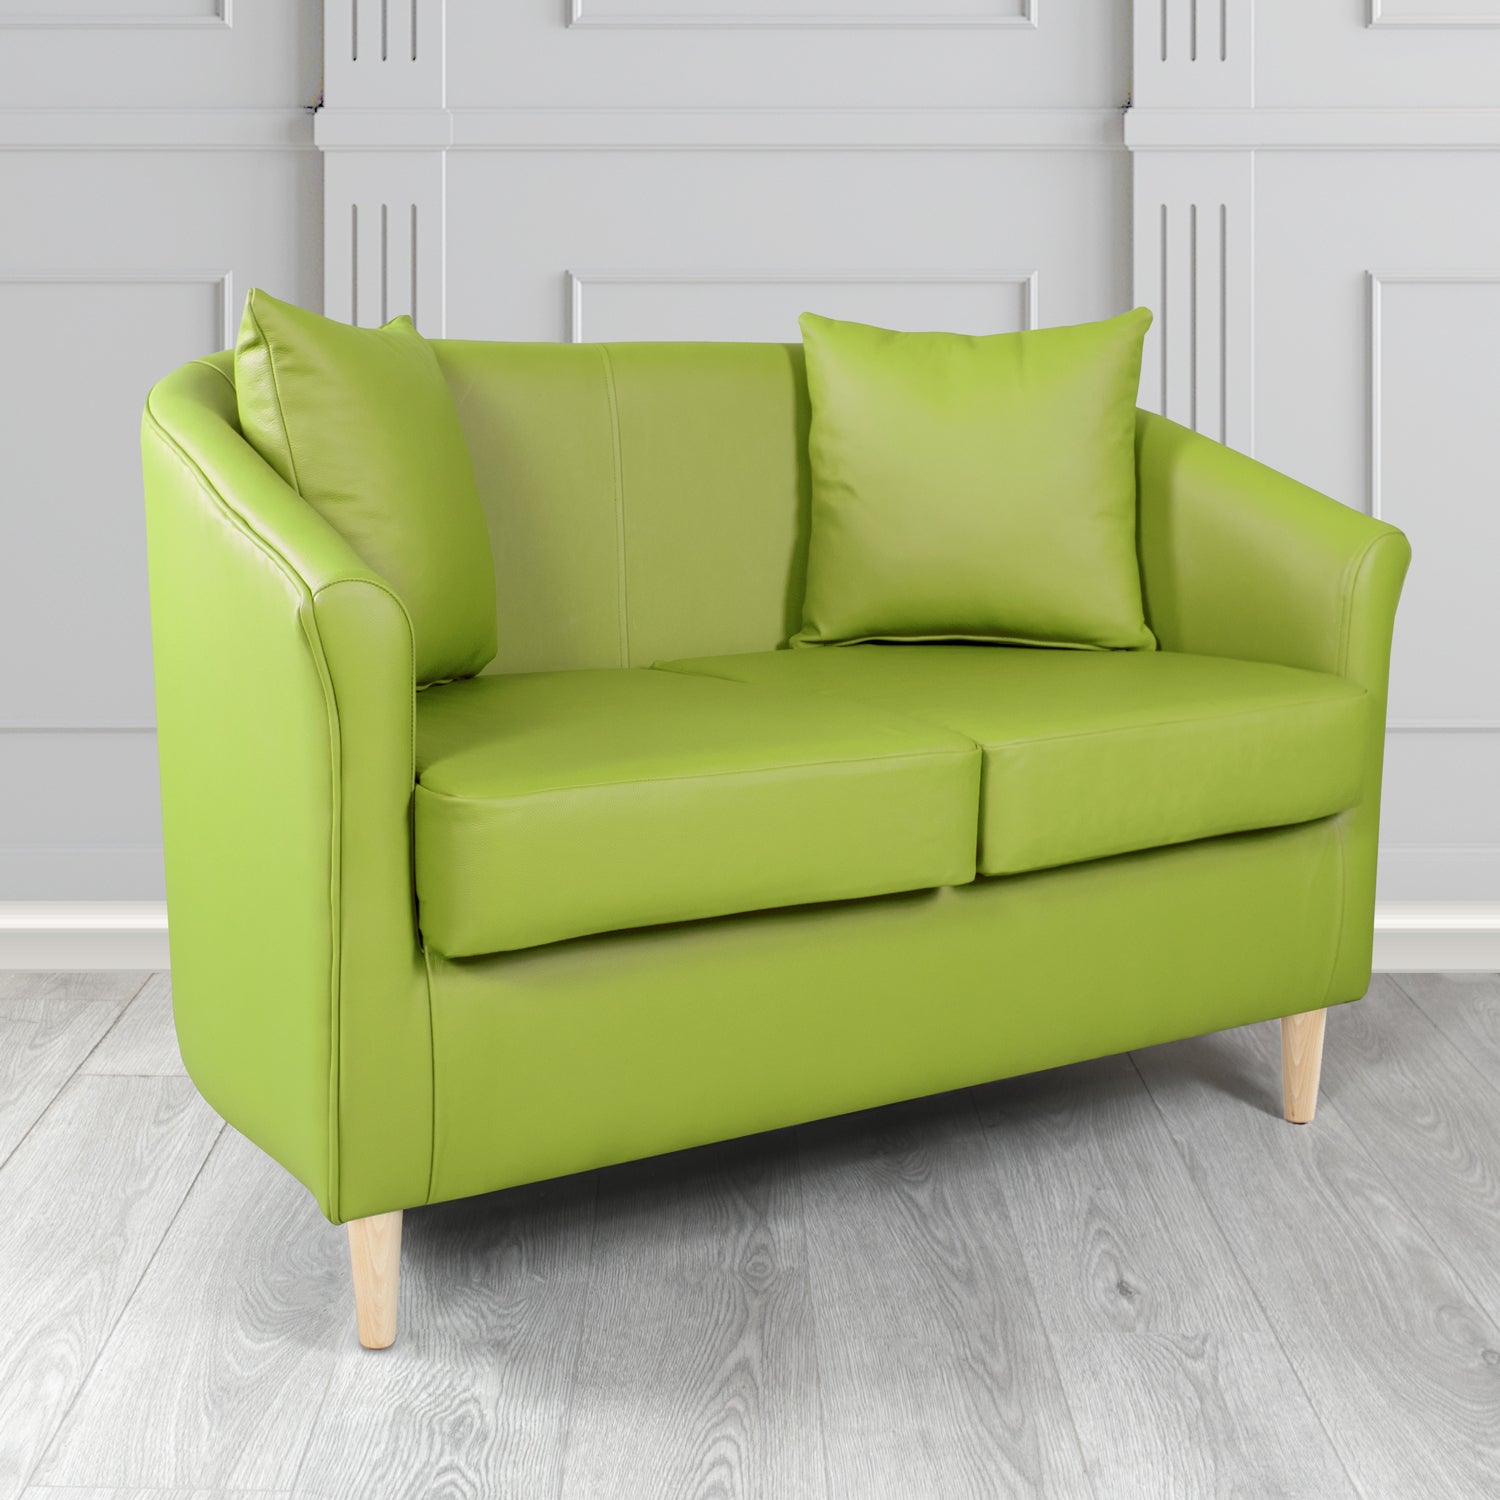 St Tropez Shelly Field Green Crib 5 Genuine Leather 2 Seater Tub Sofa with Scatter Cushions - The Tub Chair Shop